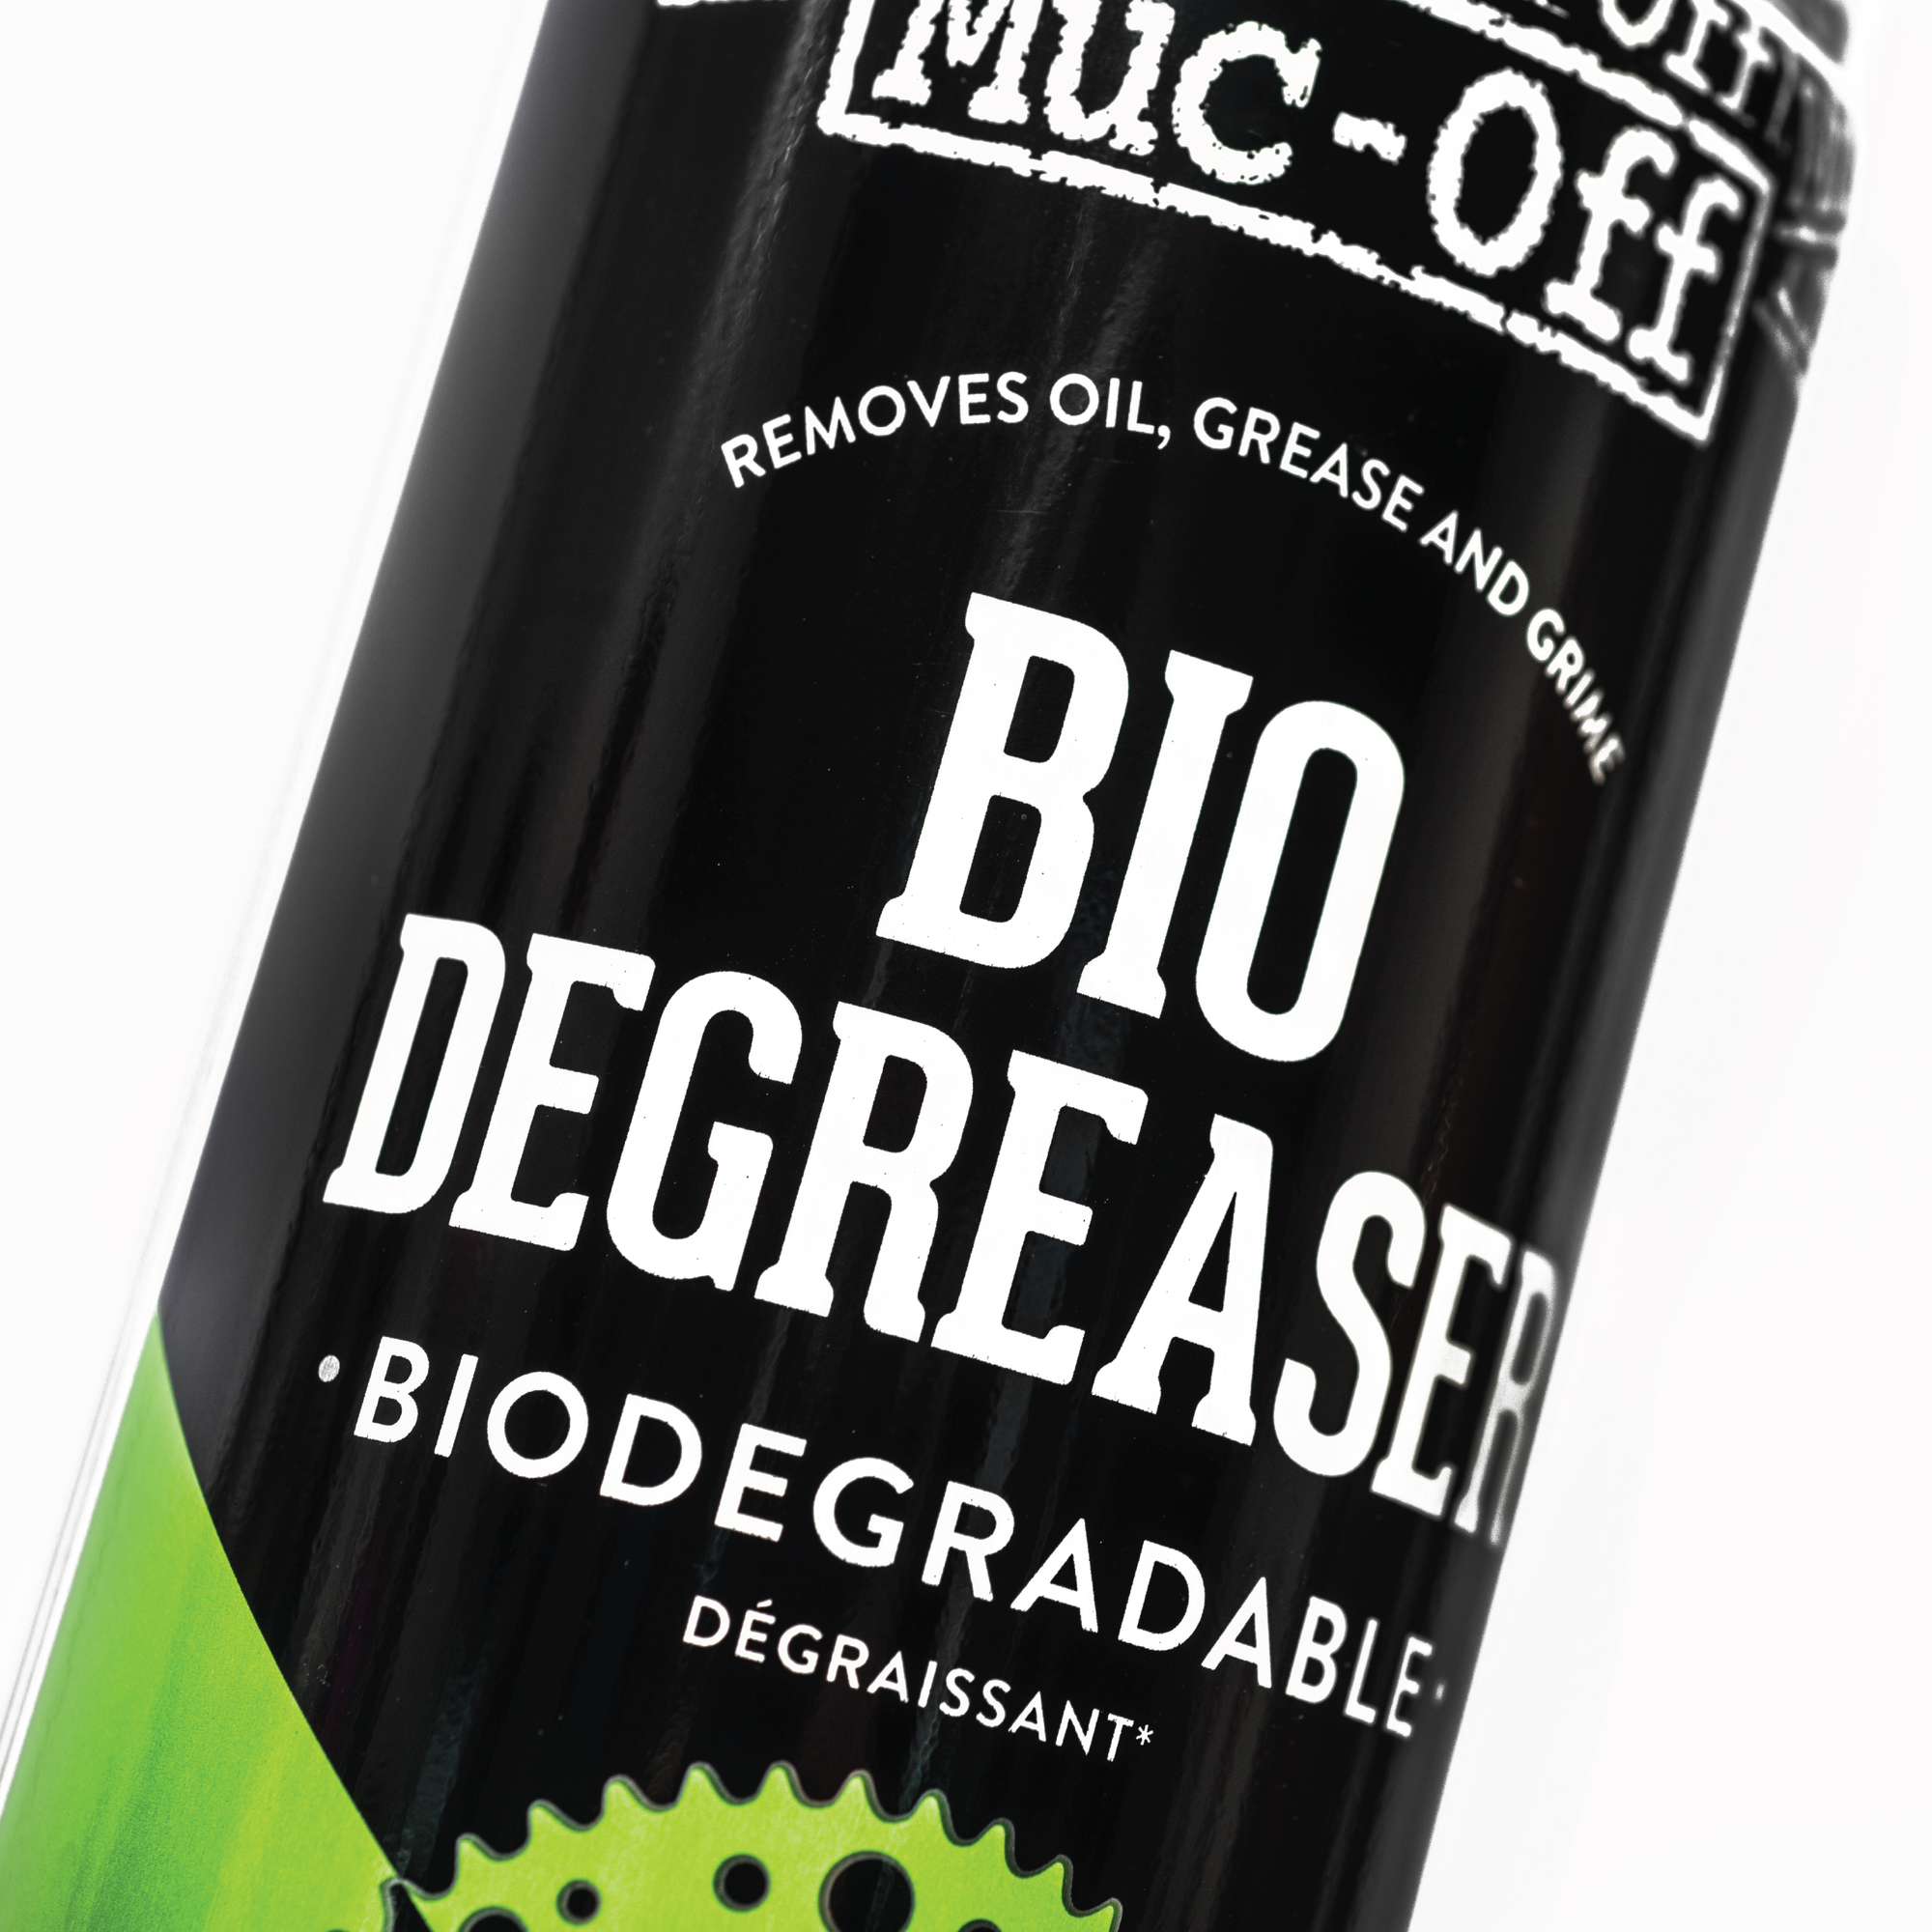  Muc-Off Bio Degreaser, 500 Milliliters - Water-Soluble,  Biodegradable Bike Degreaser Spray - Effectively Deep Cleans Greasy Bicycle  Parts : Automotive